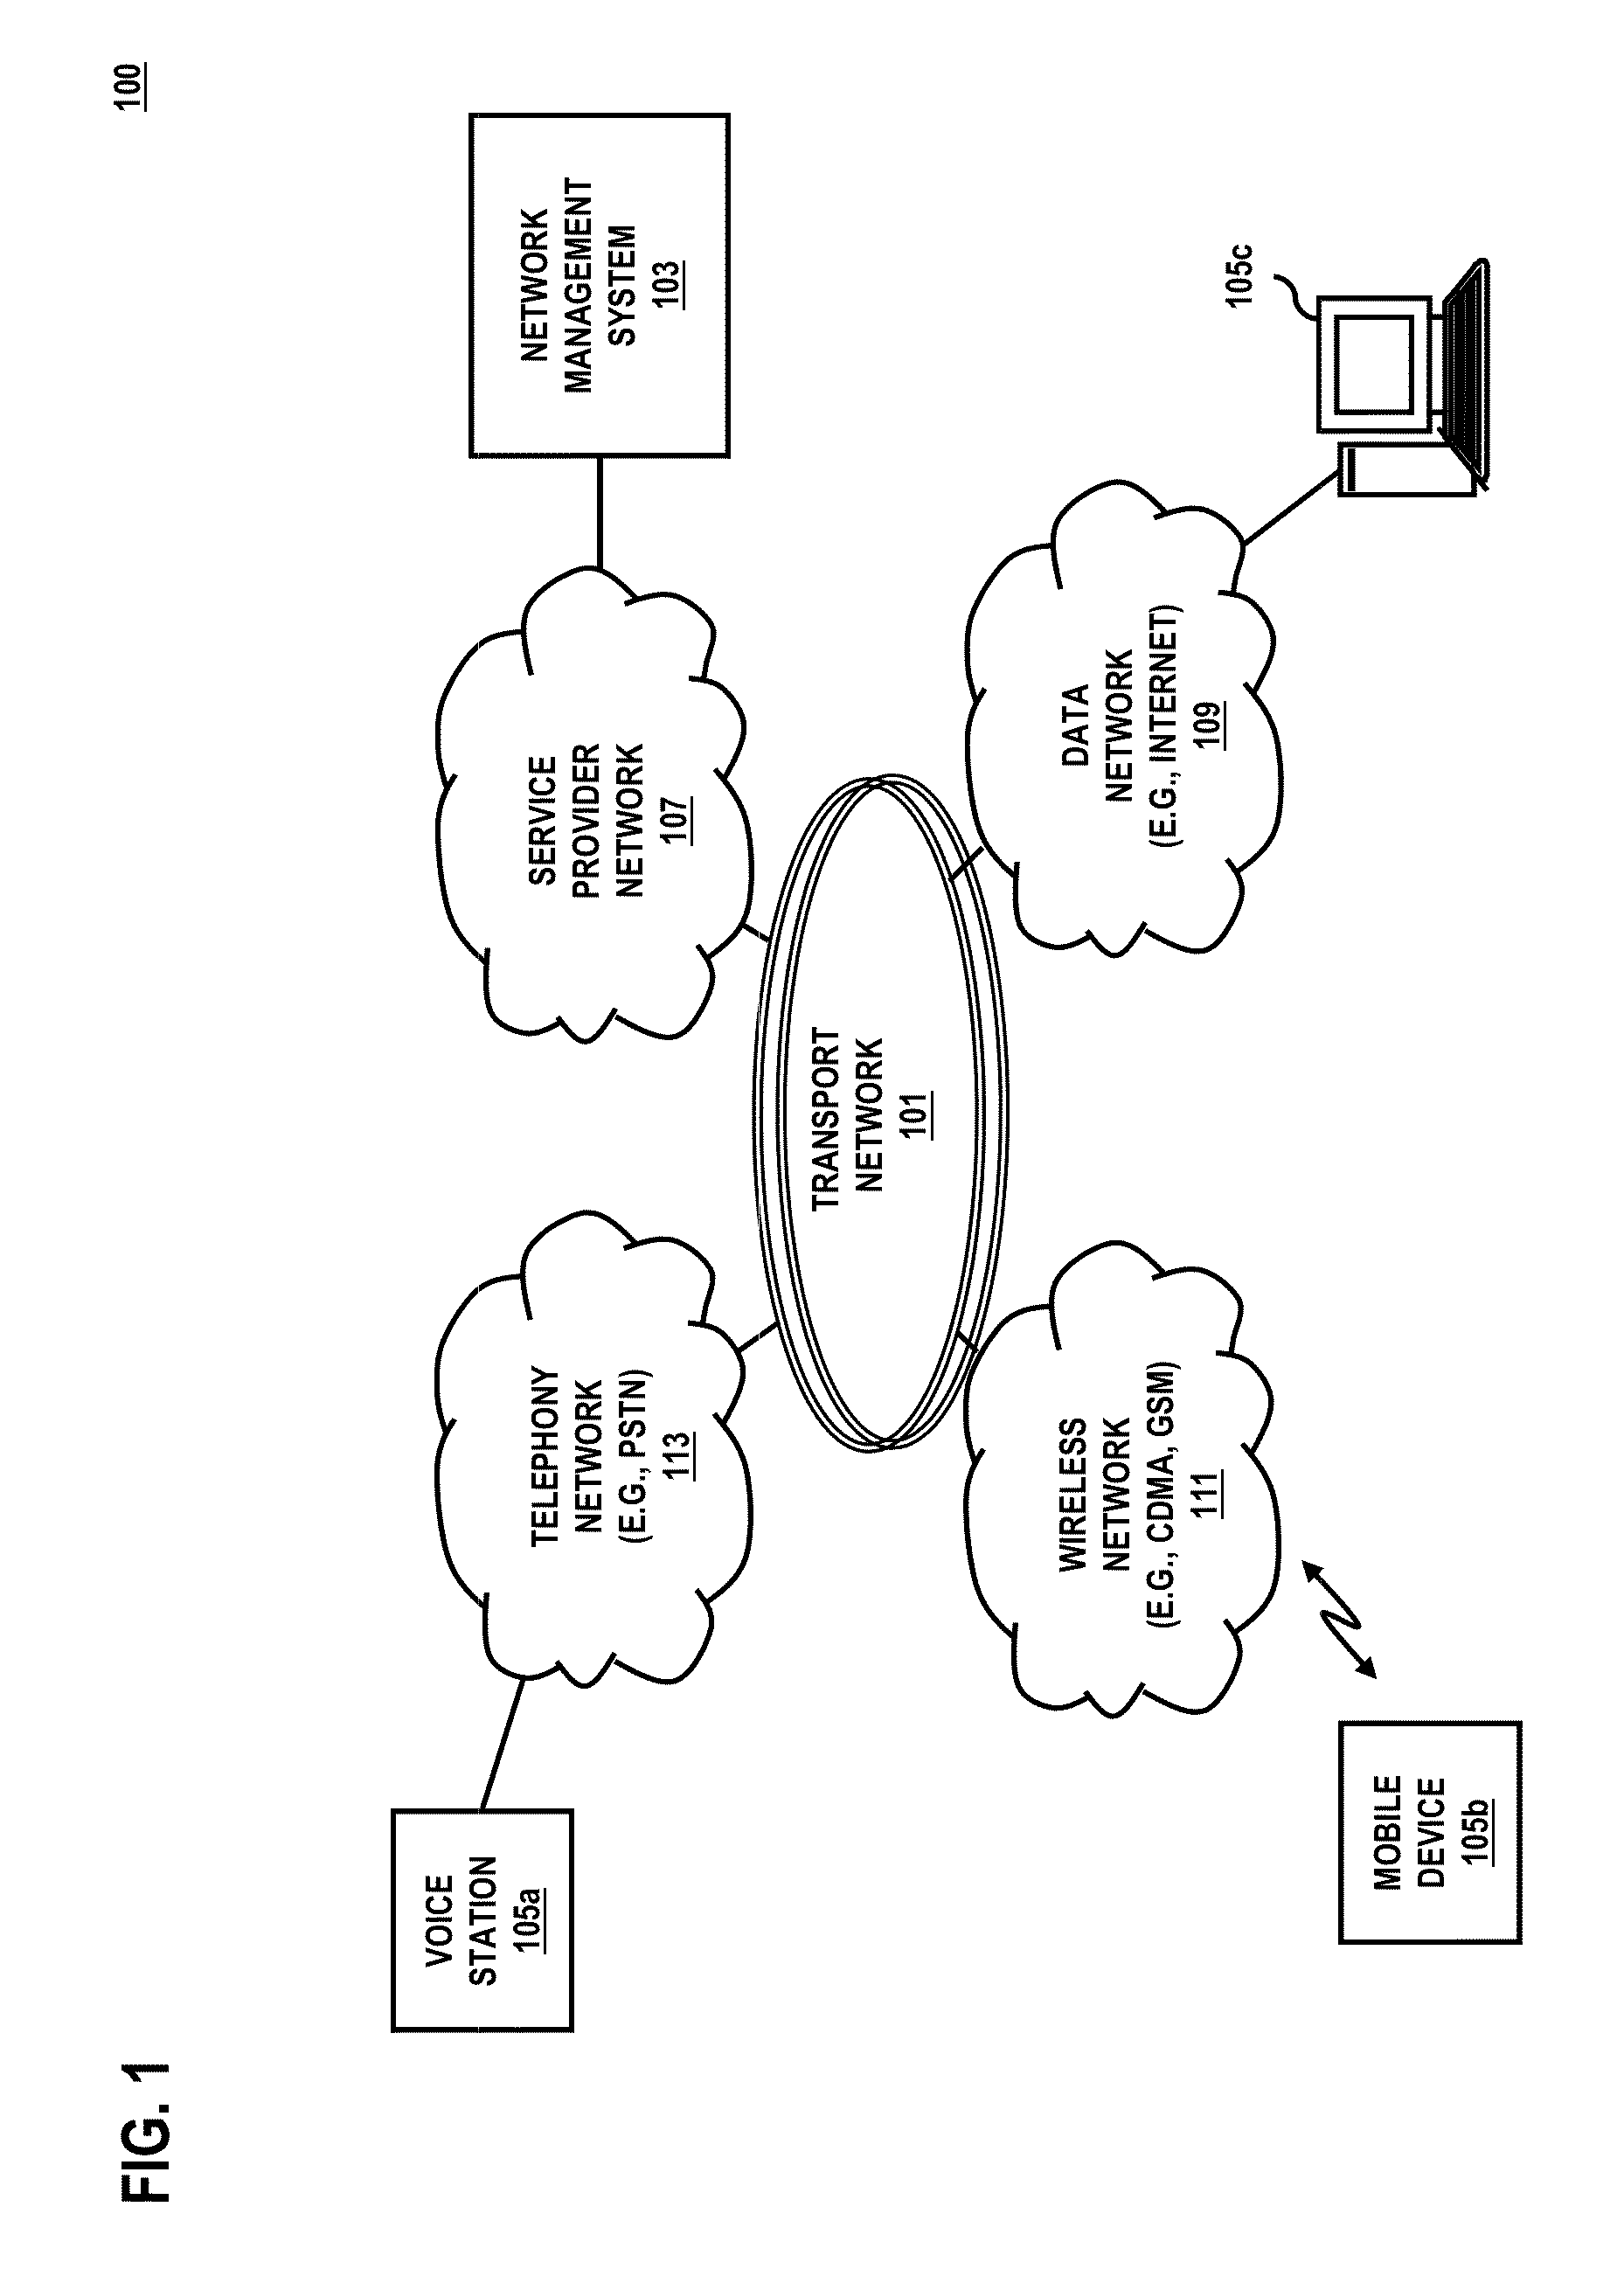 Method and system for providing a shared demarcation point to monitor network performance